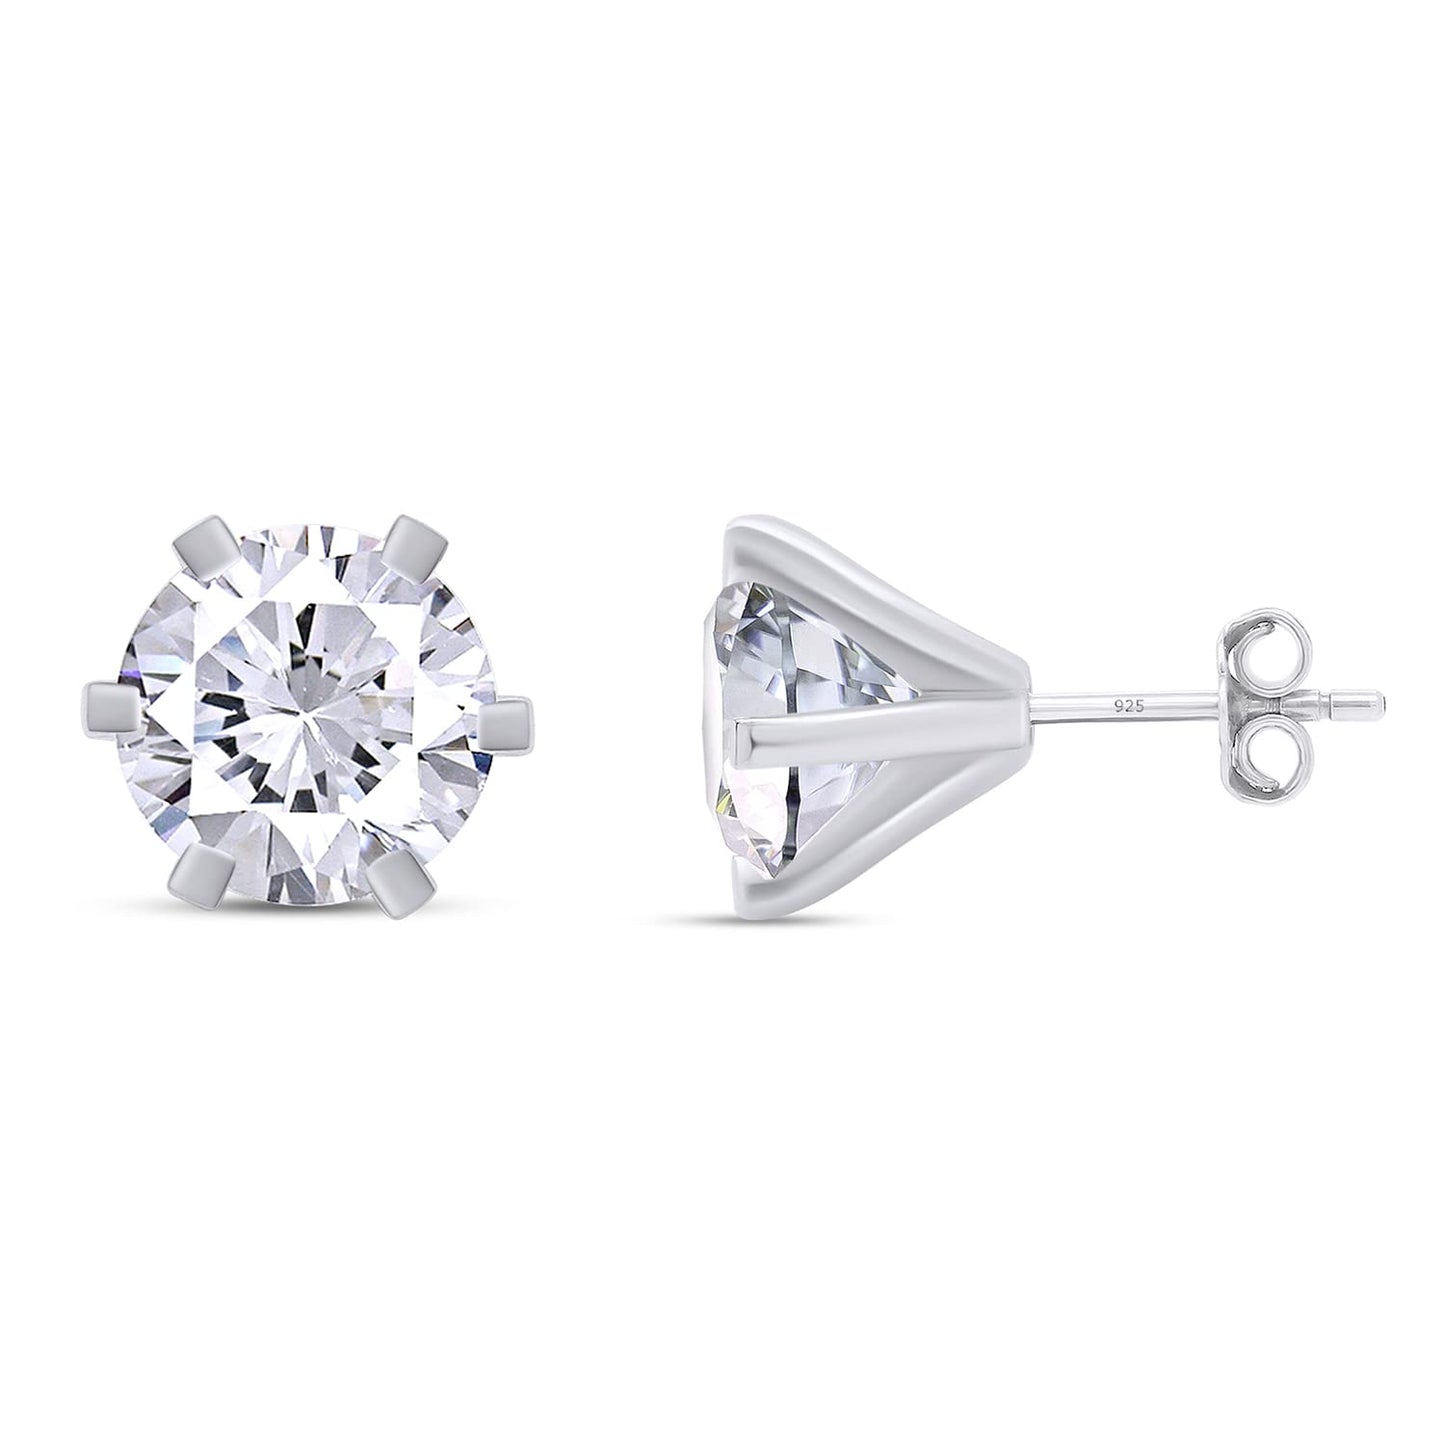 Load image into Gallery viewer, 4 Carat Lab Created Moissanite Diamond Solitaire Stud Earrings In 925 Sterling Silver For Men Women
